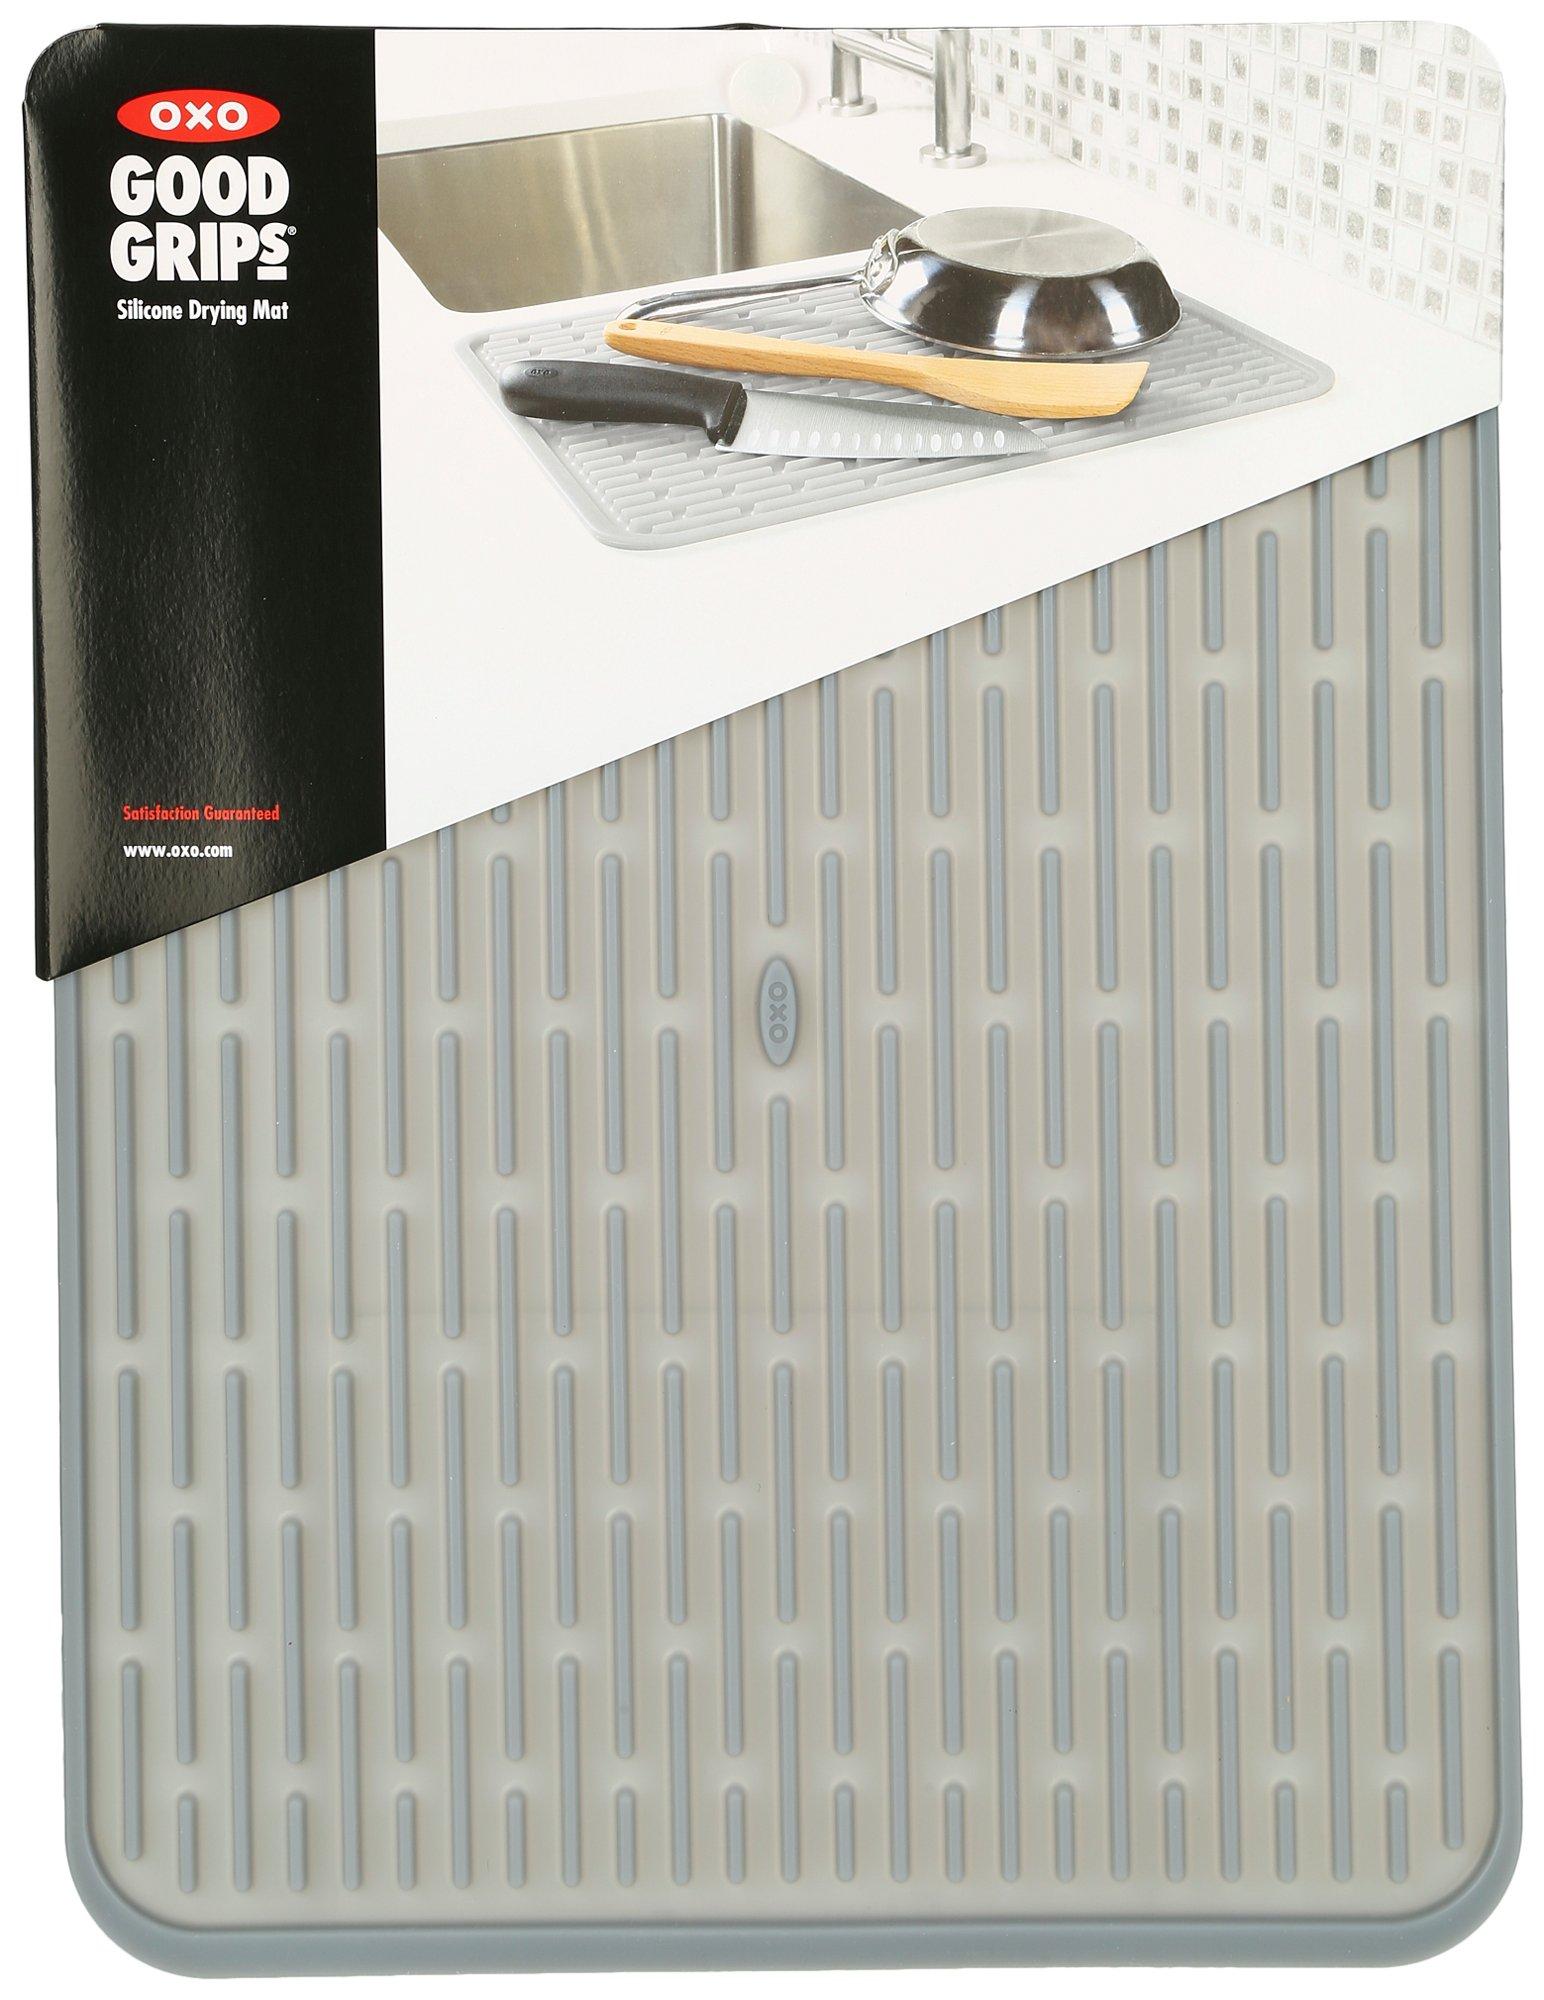 OXO Good Grips Large Silicone Drying Mat (2 pack)